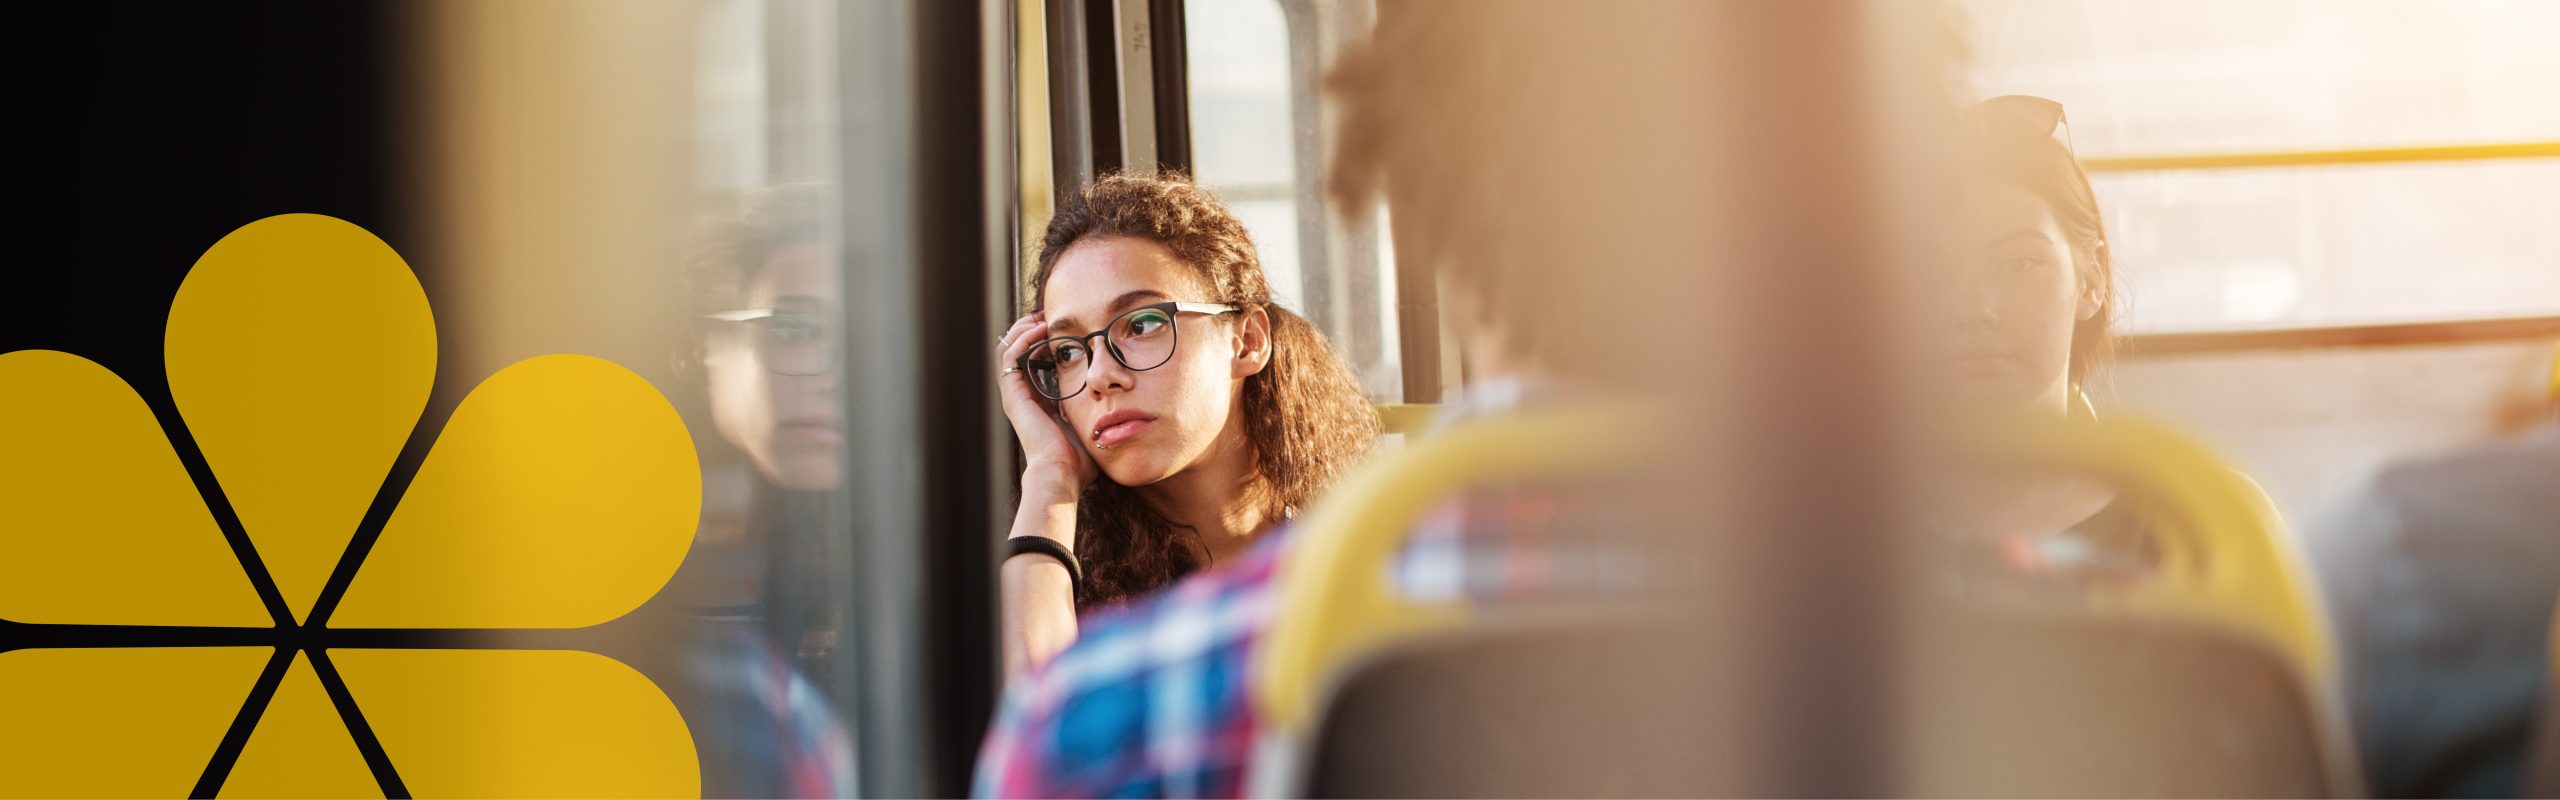 A young woman contemplatively looking out a window she is leaning on while riding the bus.